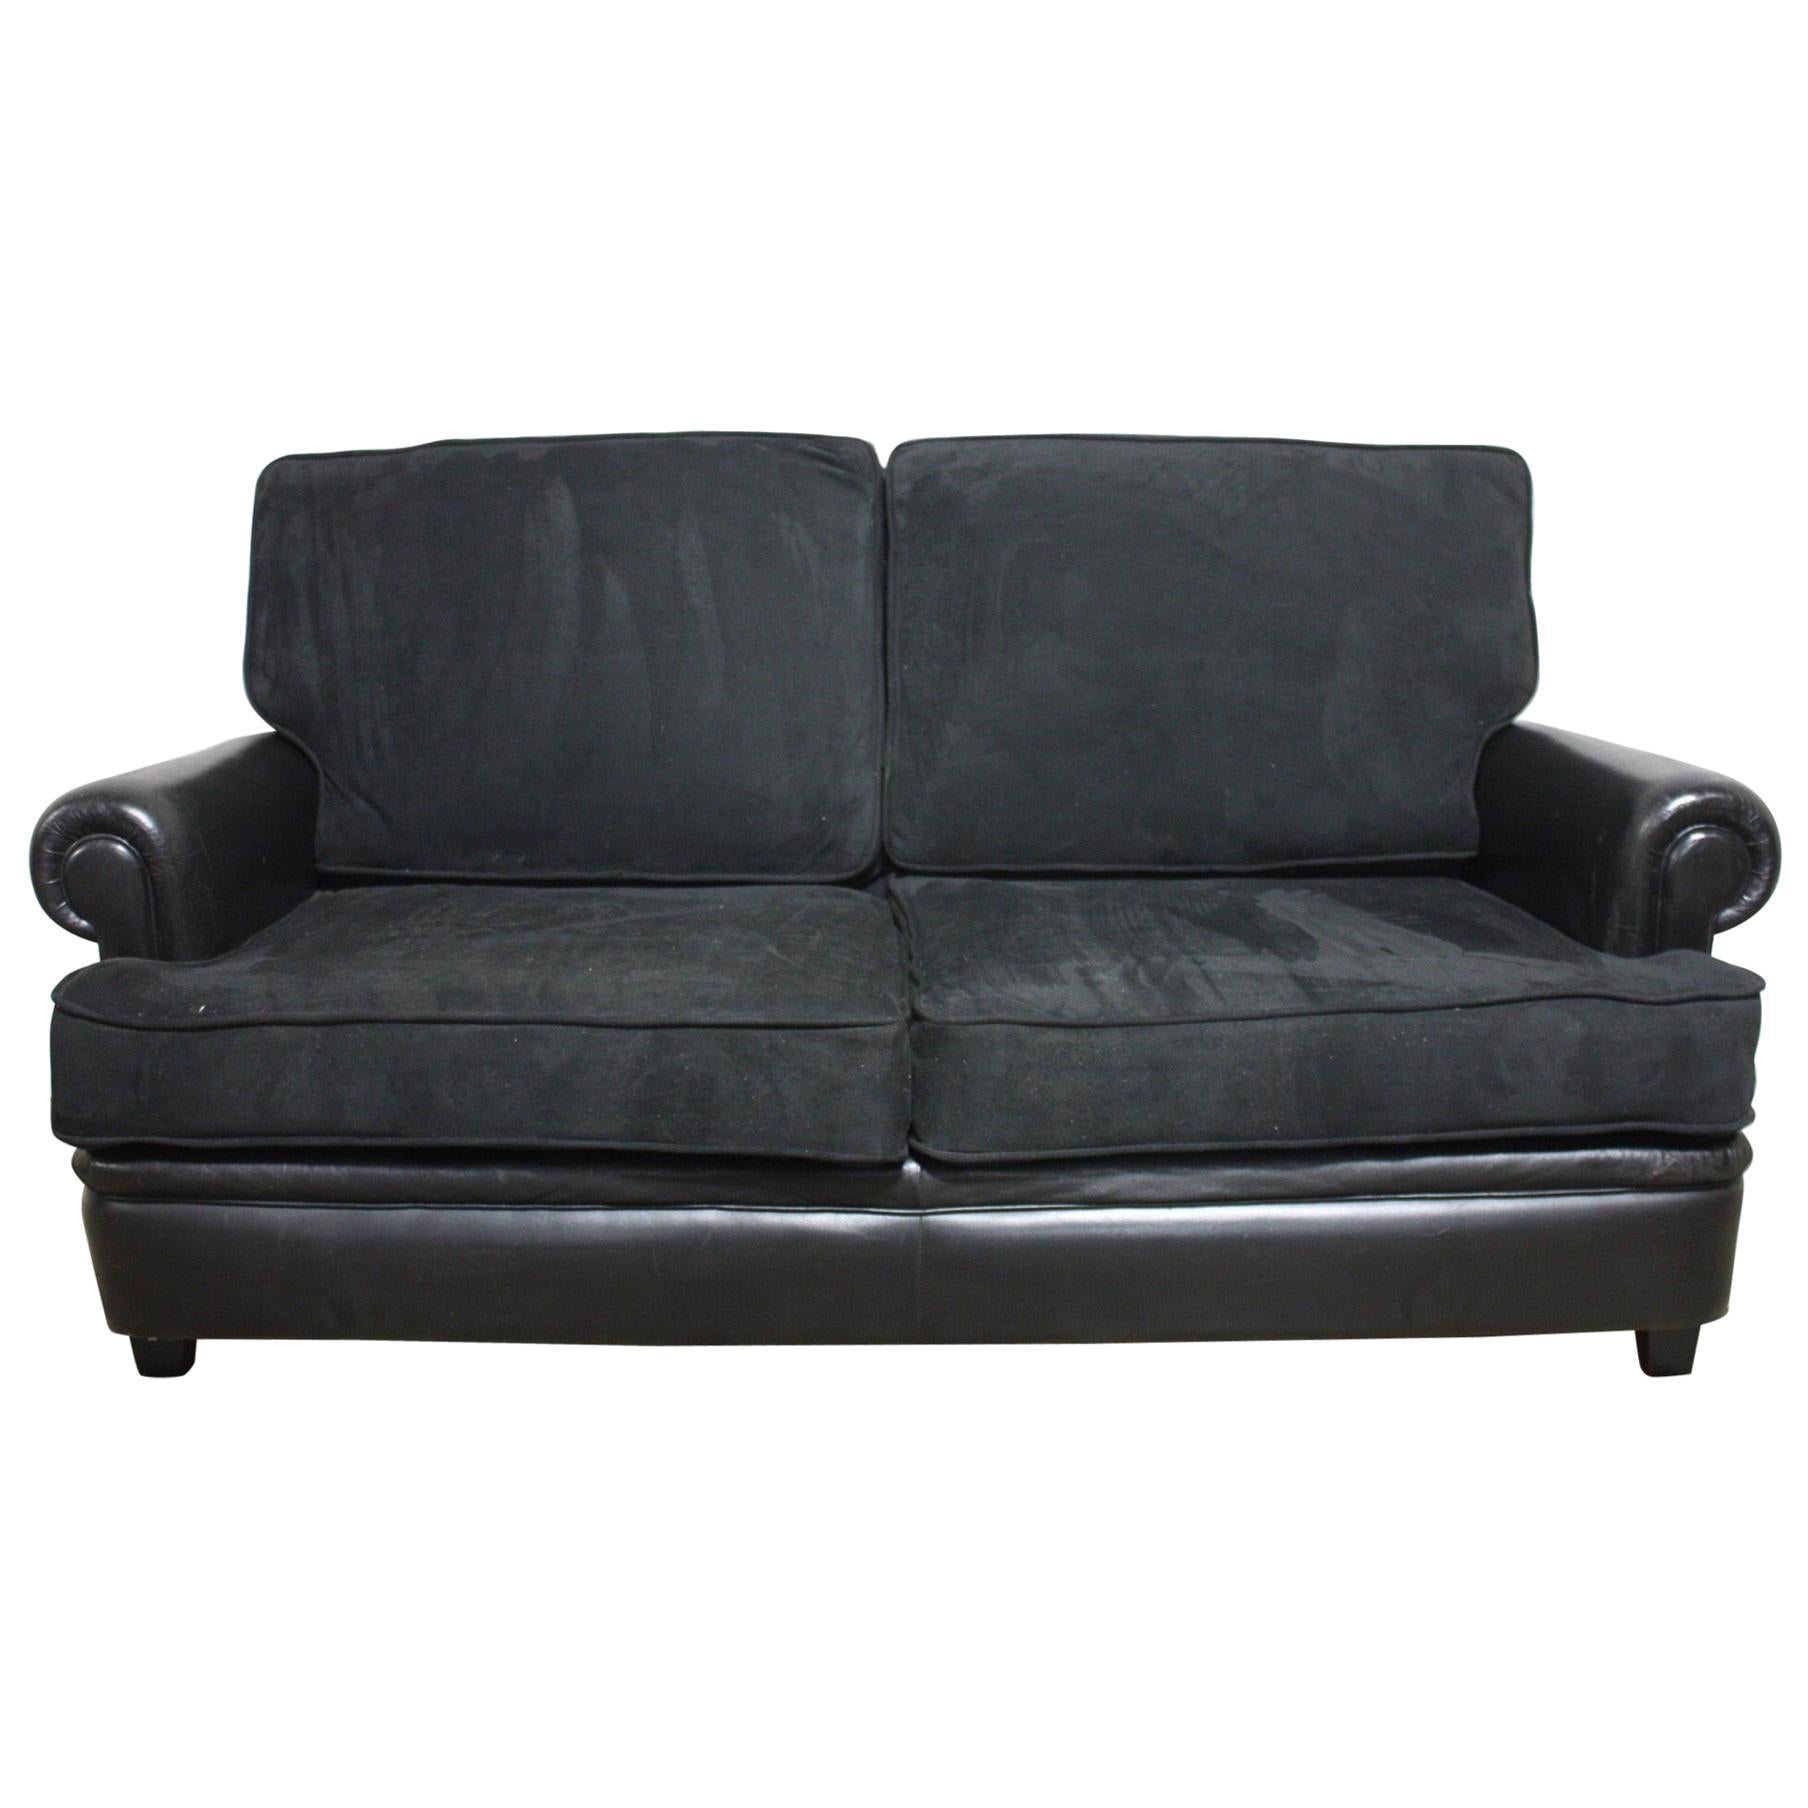 Beautiful French Leather Sofa For Sale